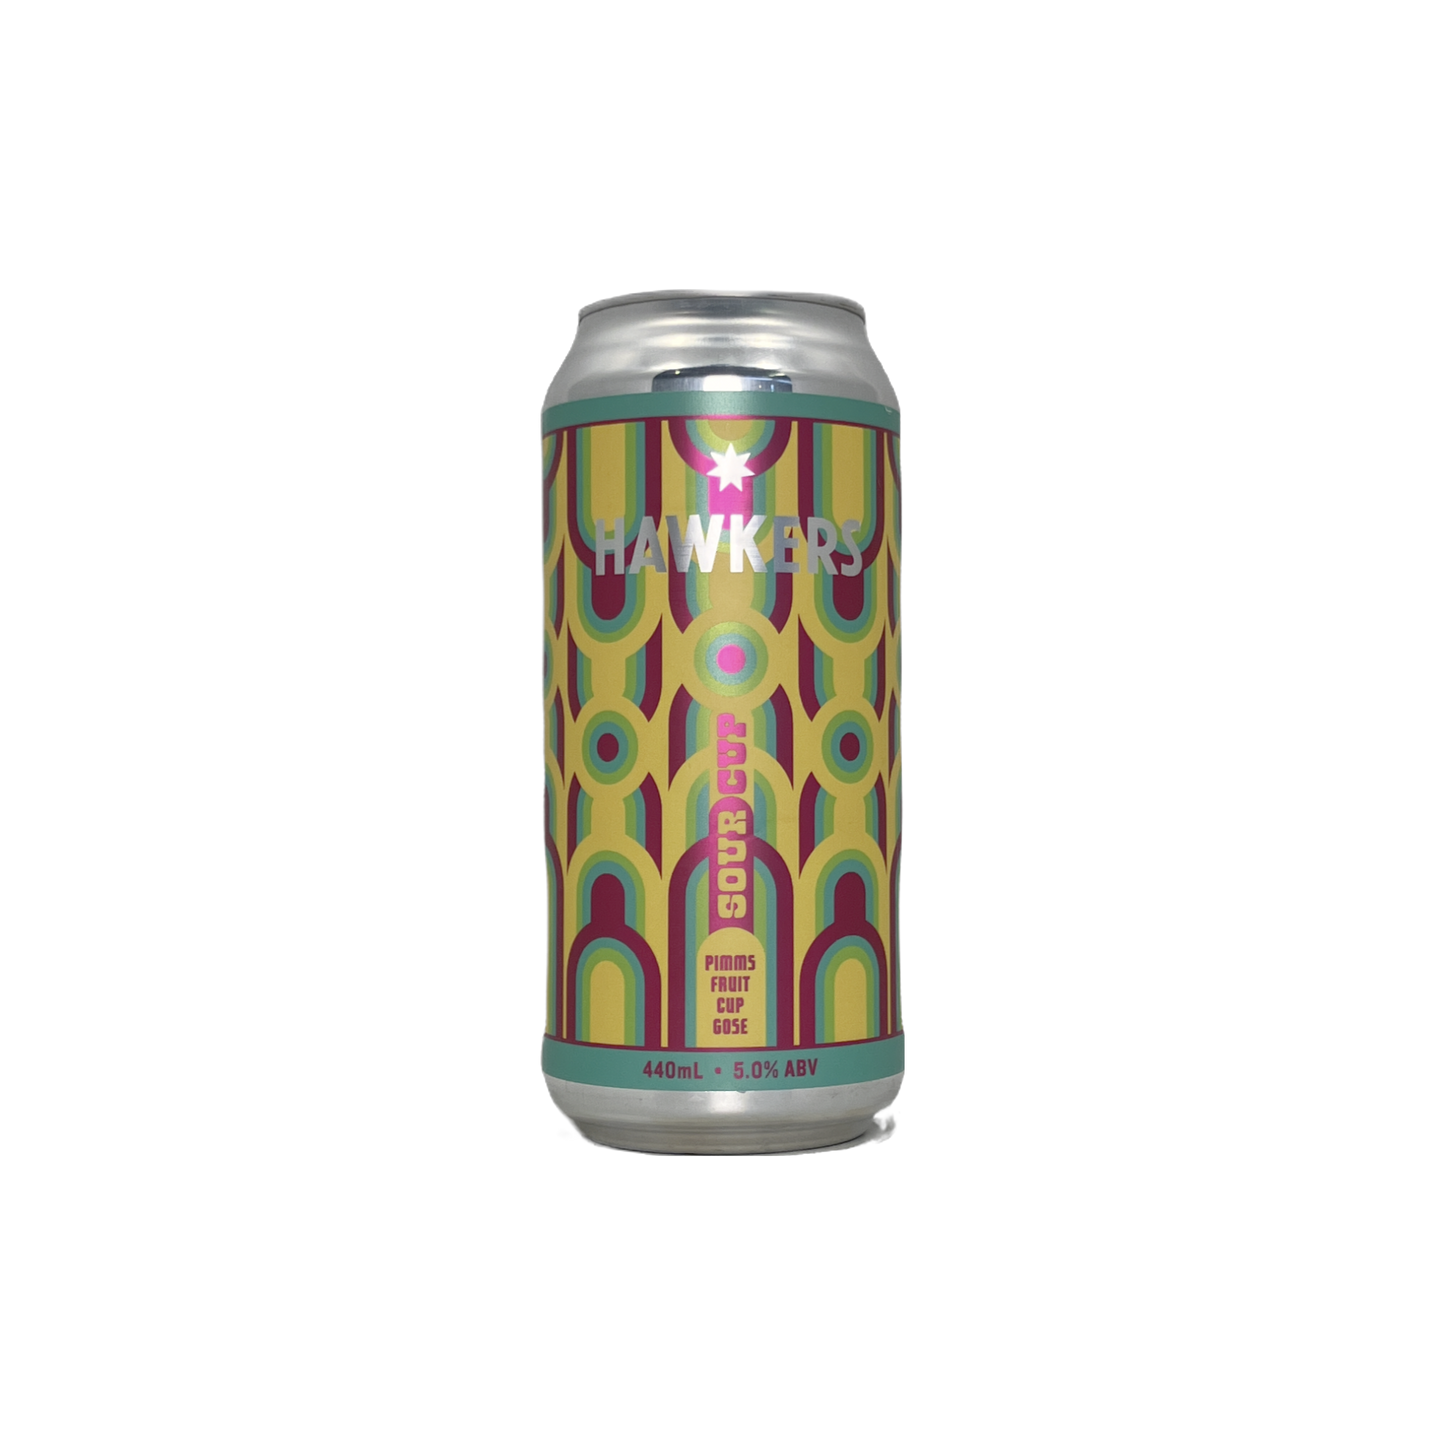 Hawkers Sour Cup Pimms Fruit Cup Gose 440ml